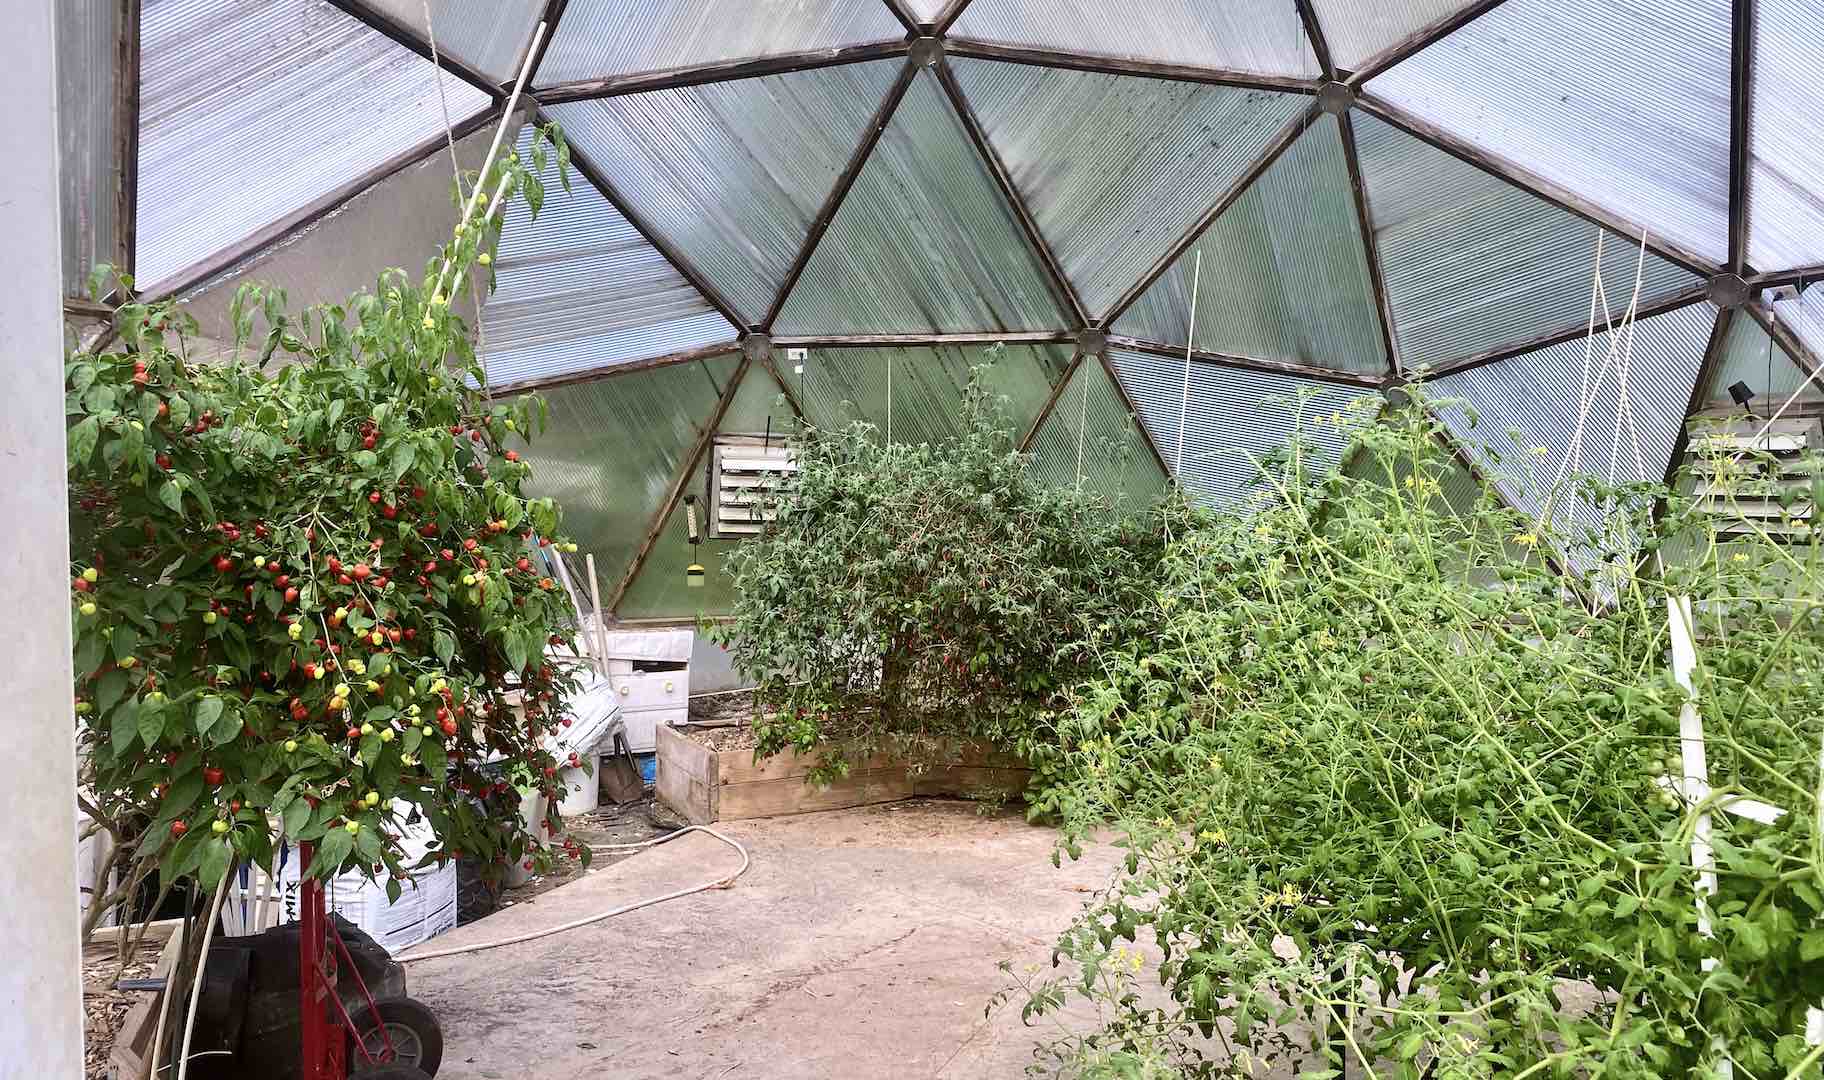 Their greenhouse dome protected the precious peppers!